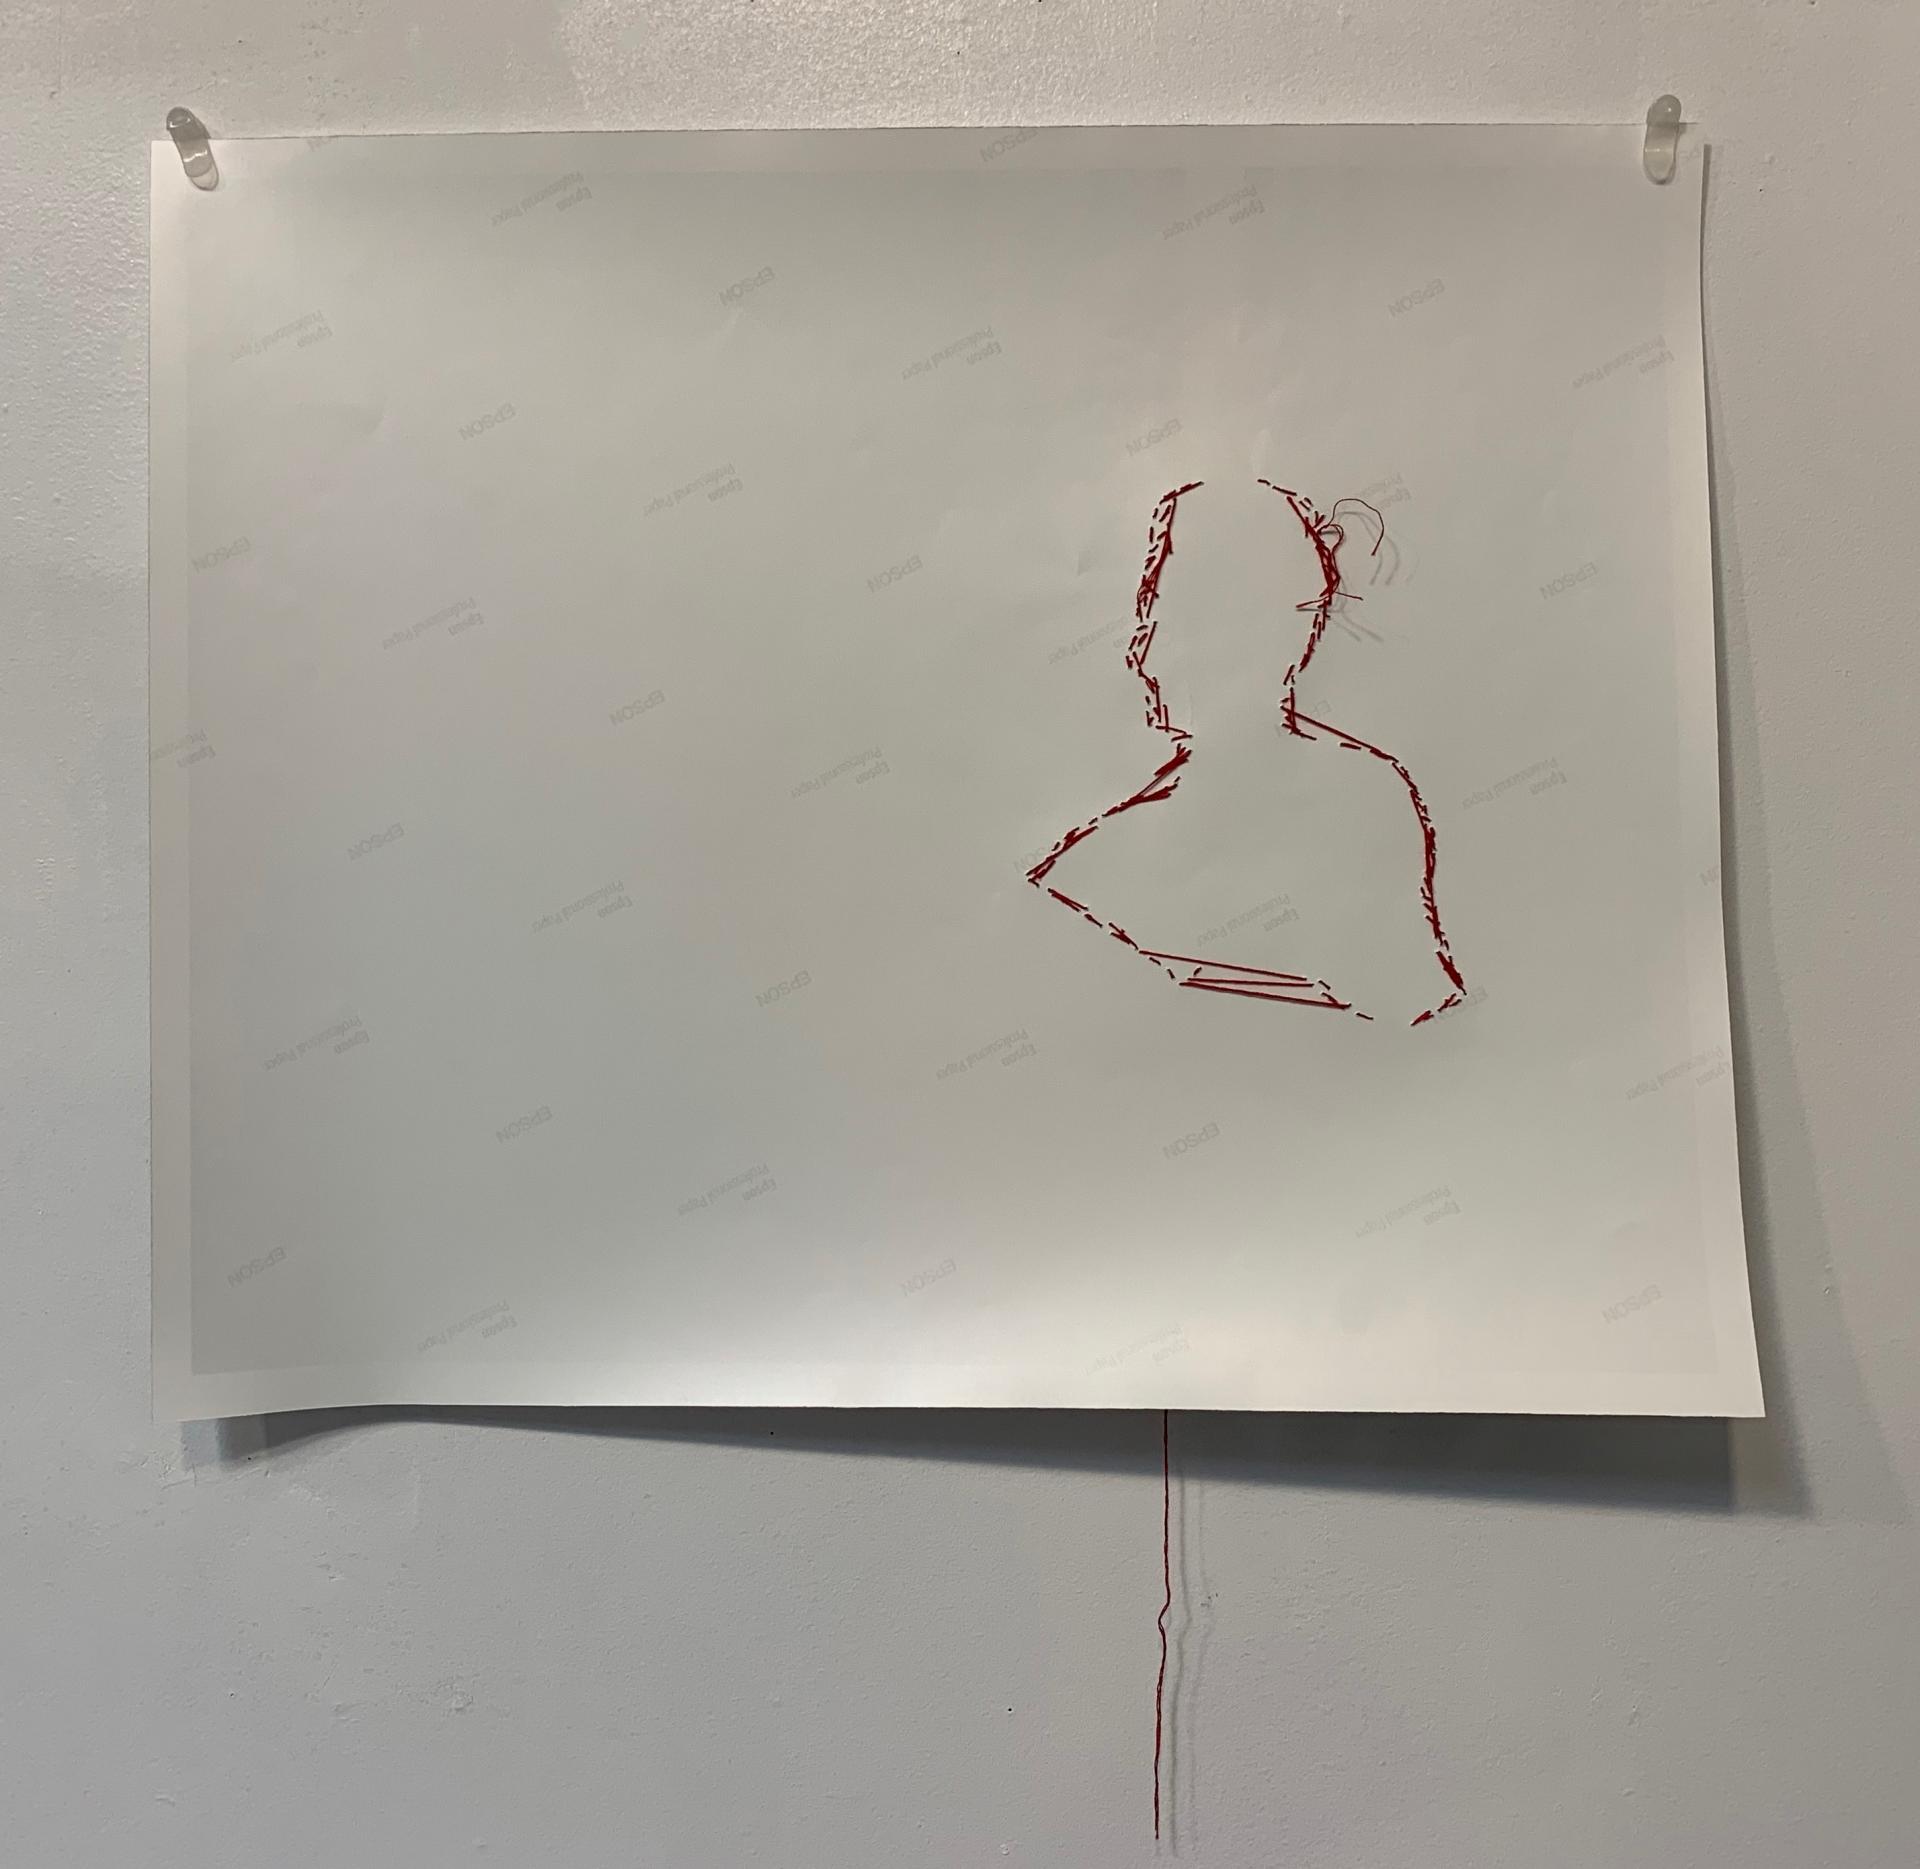 Red thread creates the outline of a figure on the back of photo paper